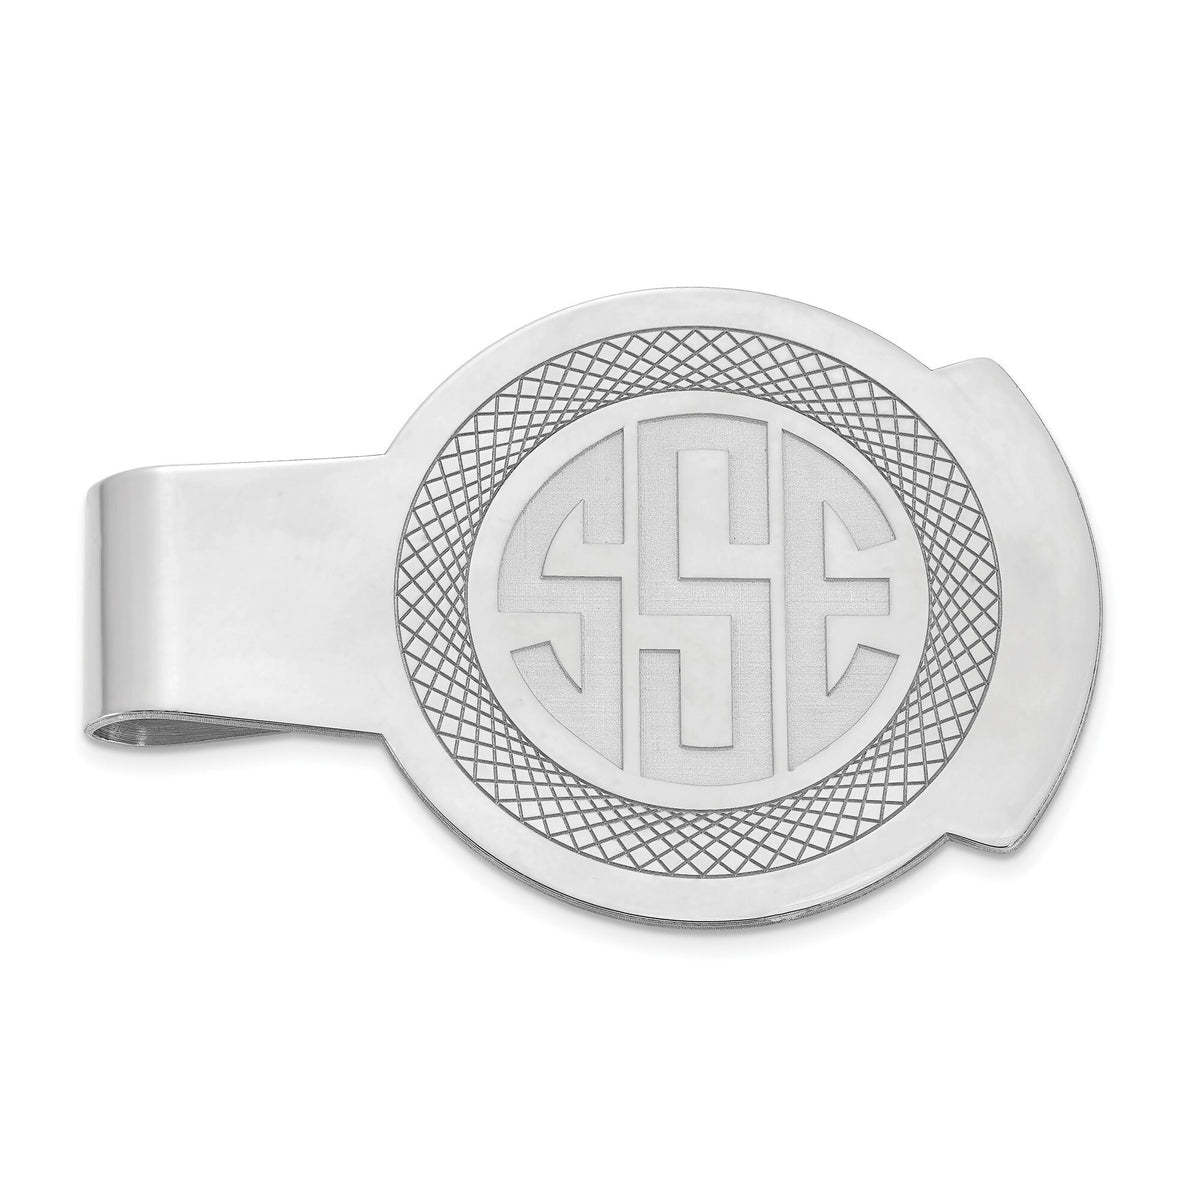 Personalized Round Monogram Money Clip -Solid Sterling Silver, Rose Gold Plated Silver& Gold Plated - Best Seller - MADE IN USA